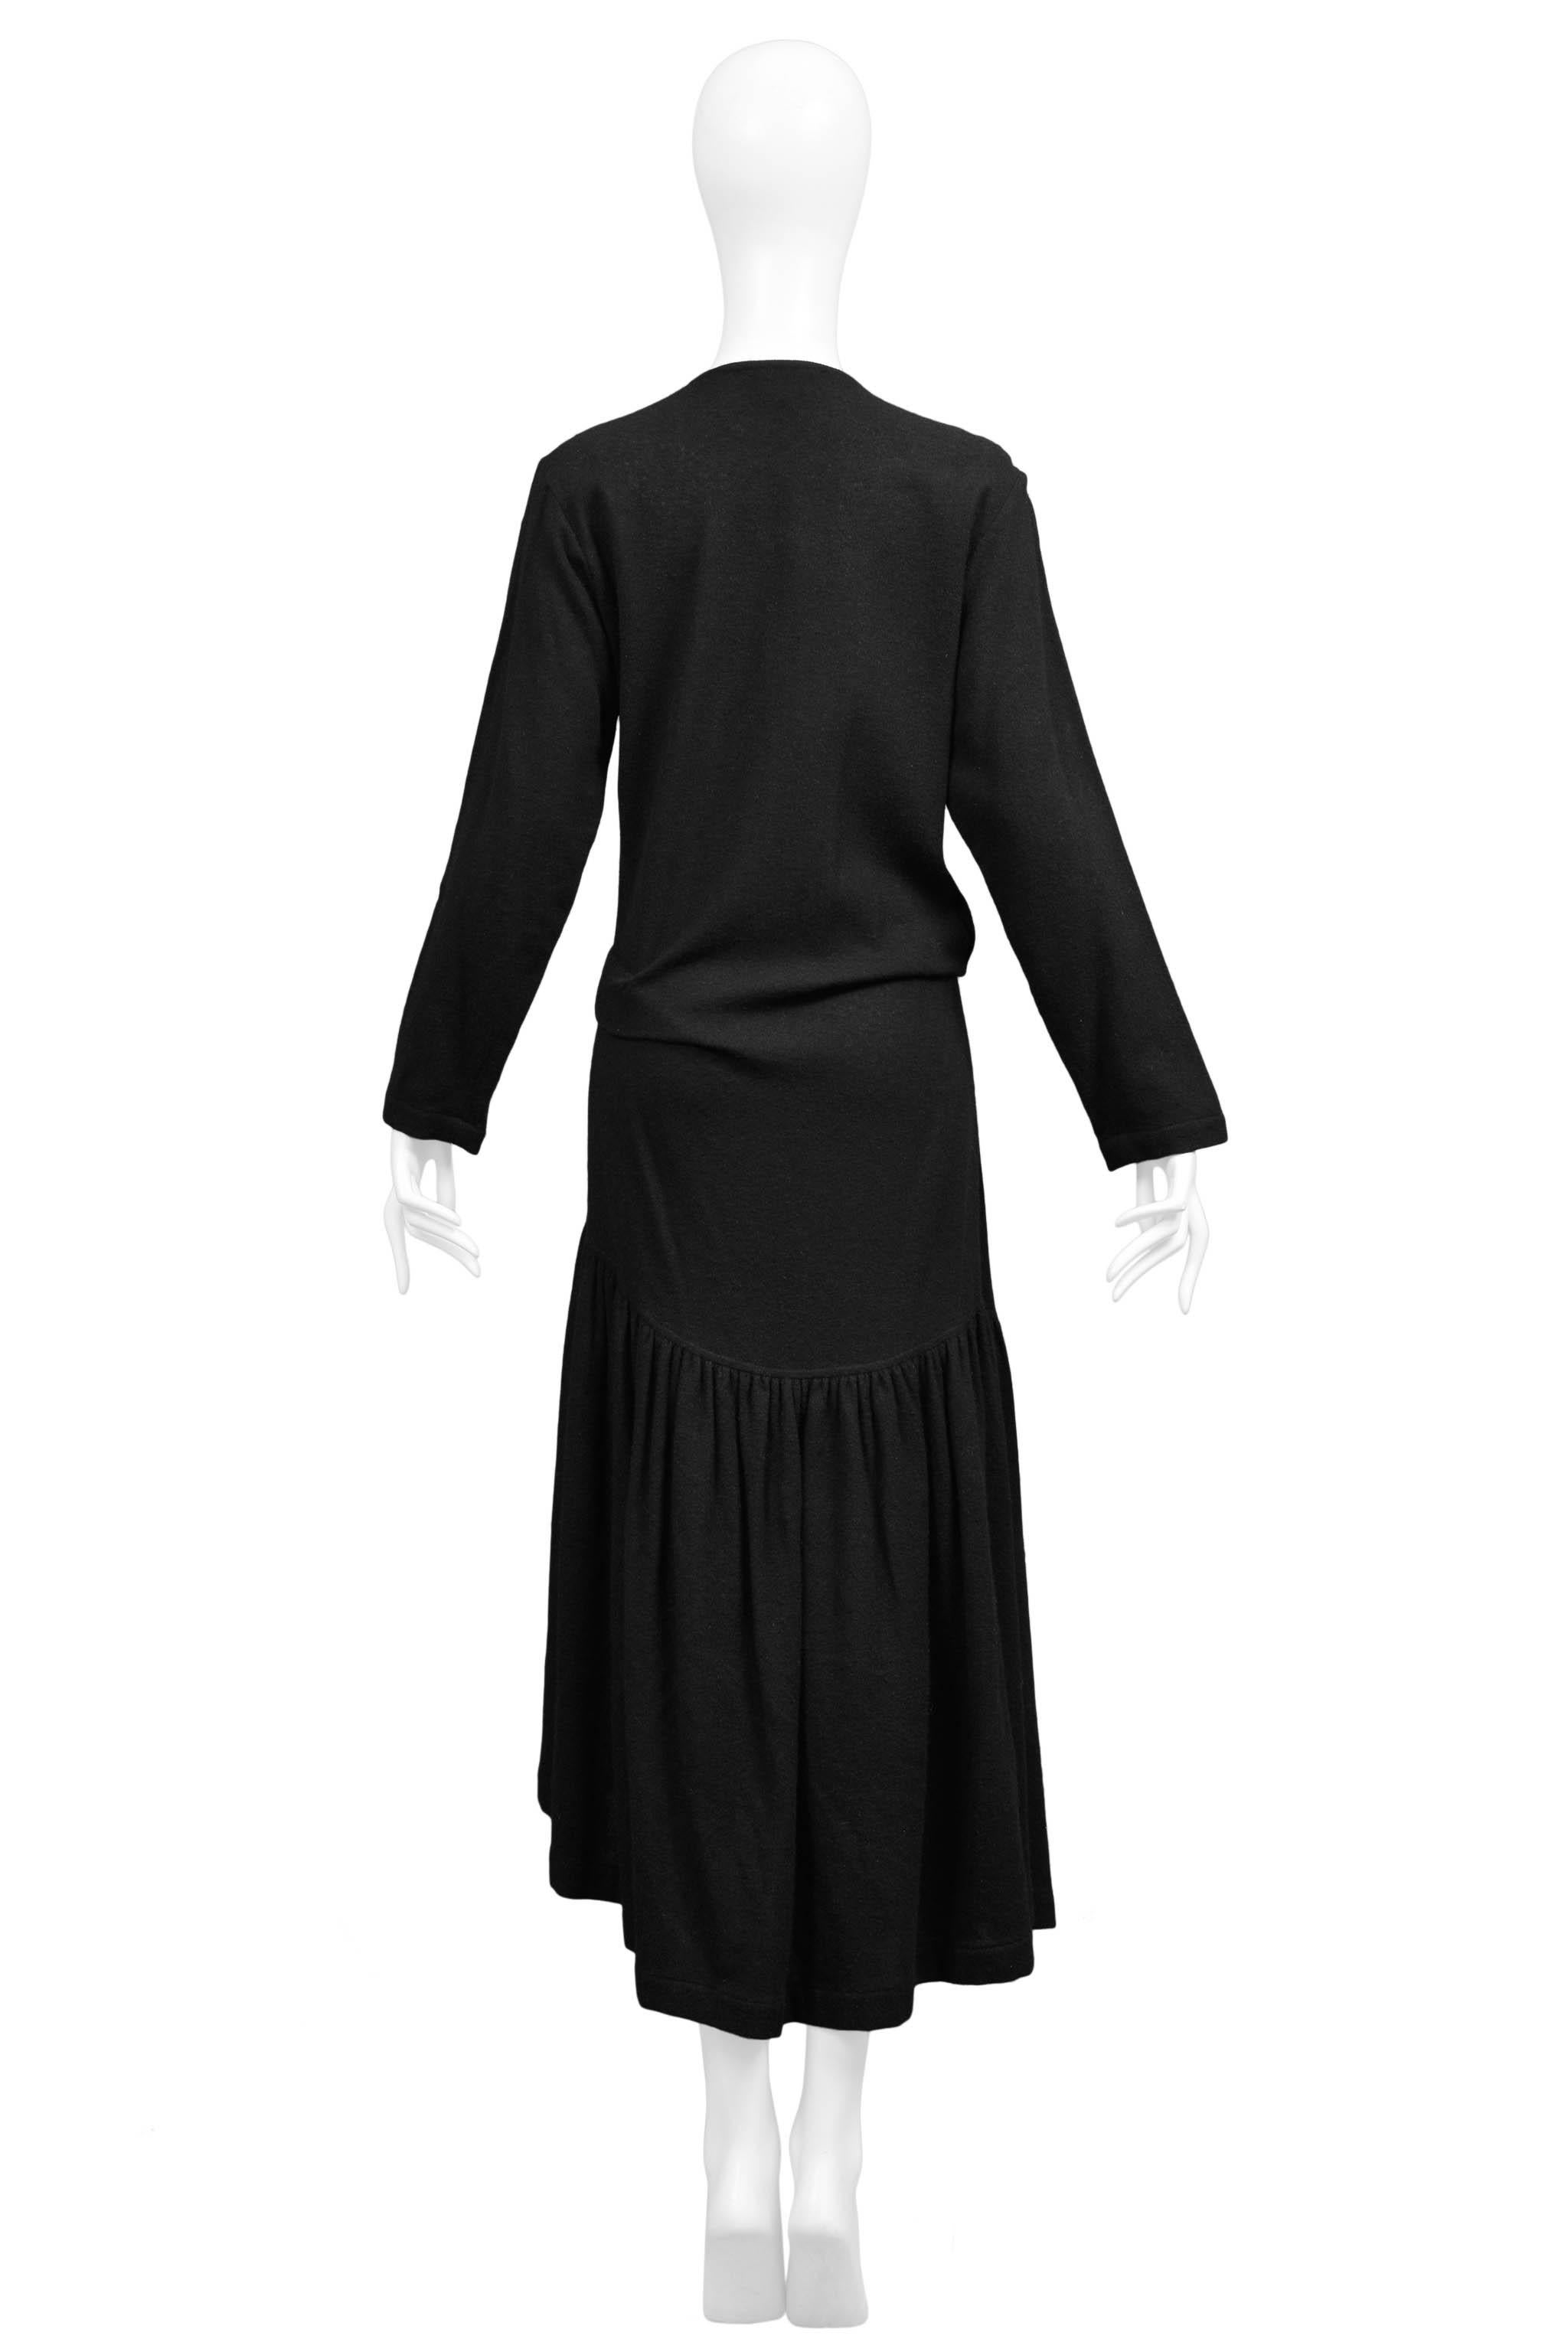 Comme Des Garcons Early Black Knit Cardigan Sweater Dress In Excellent Condition In Los Angeles, CA